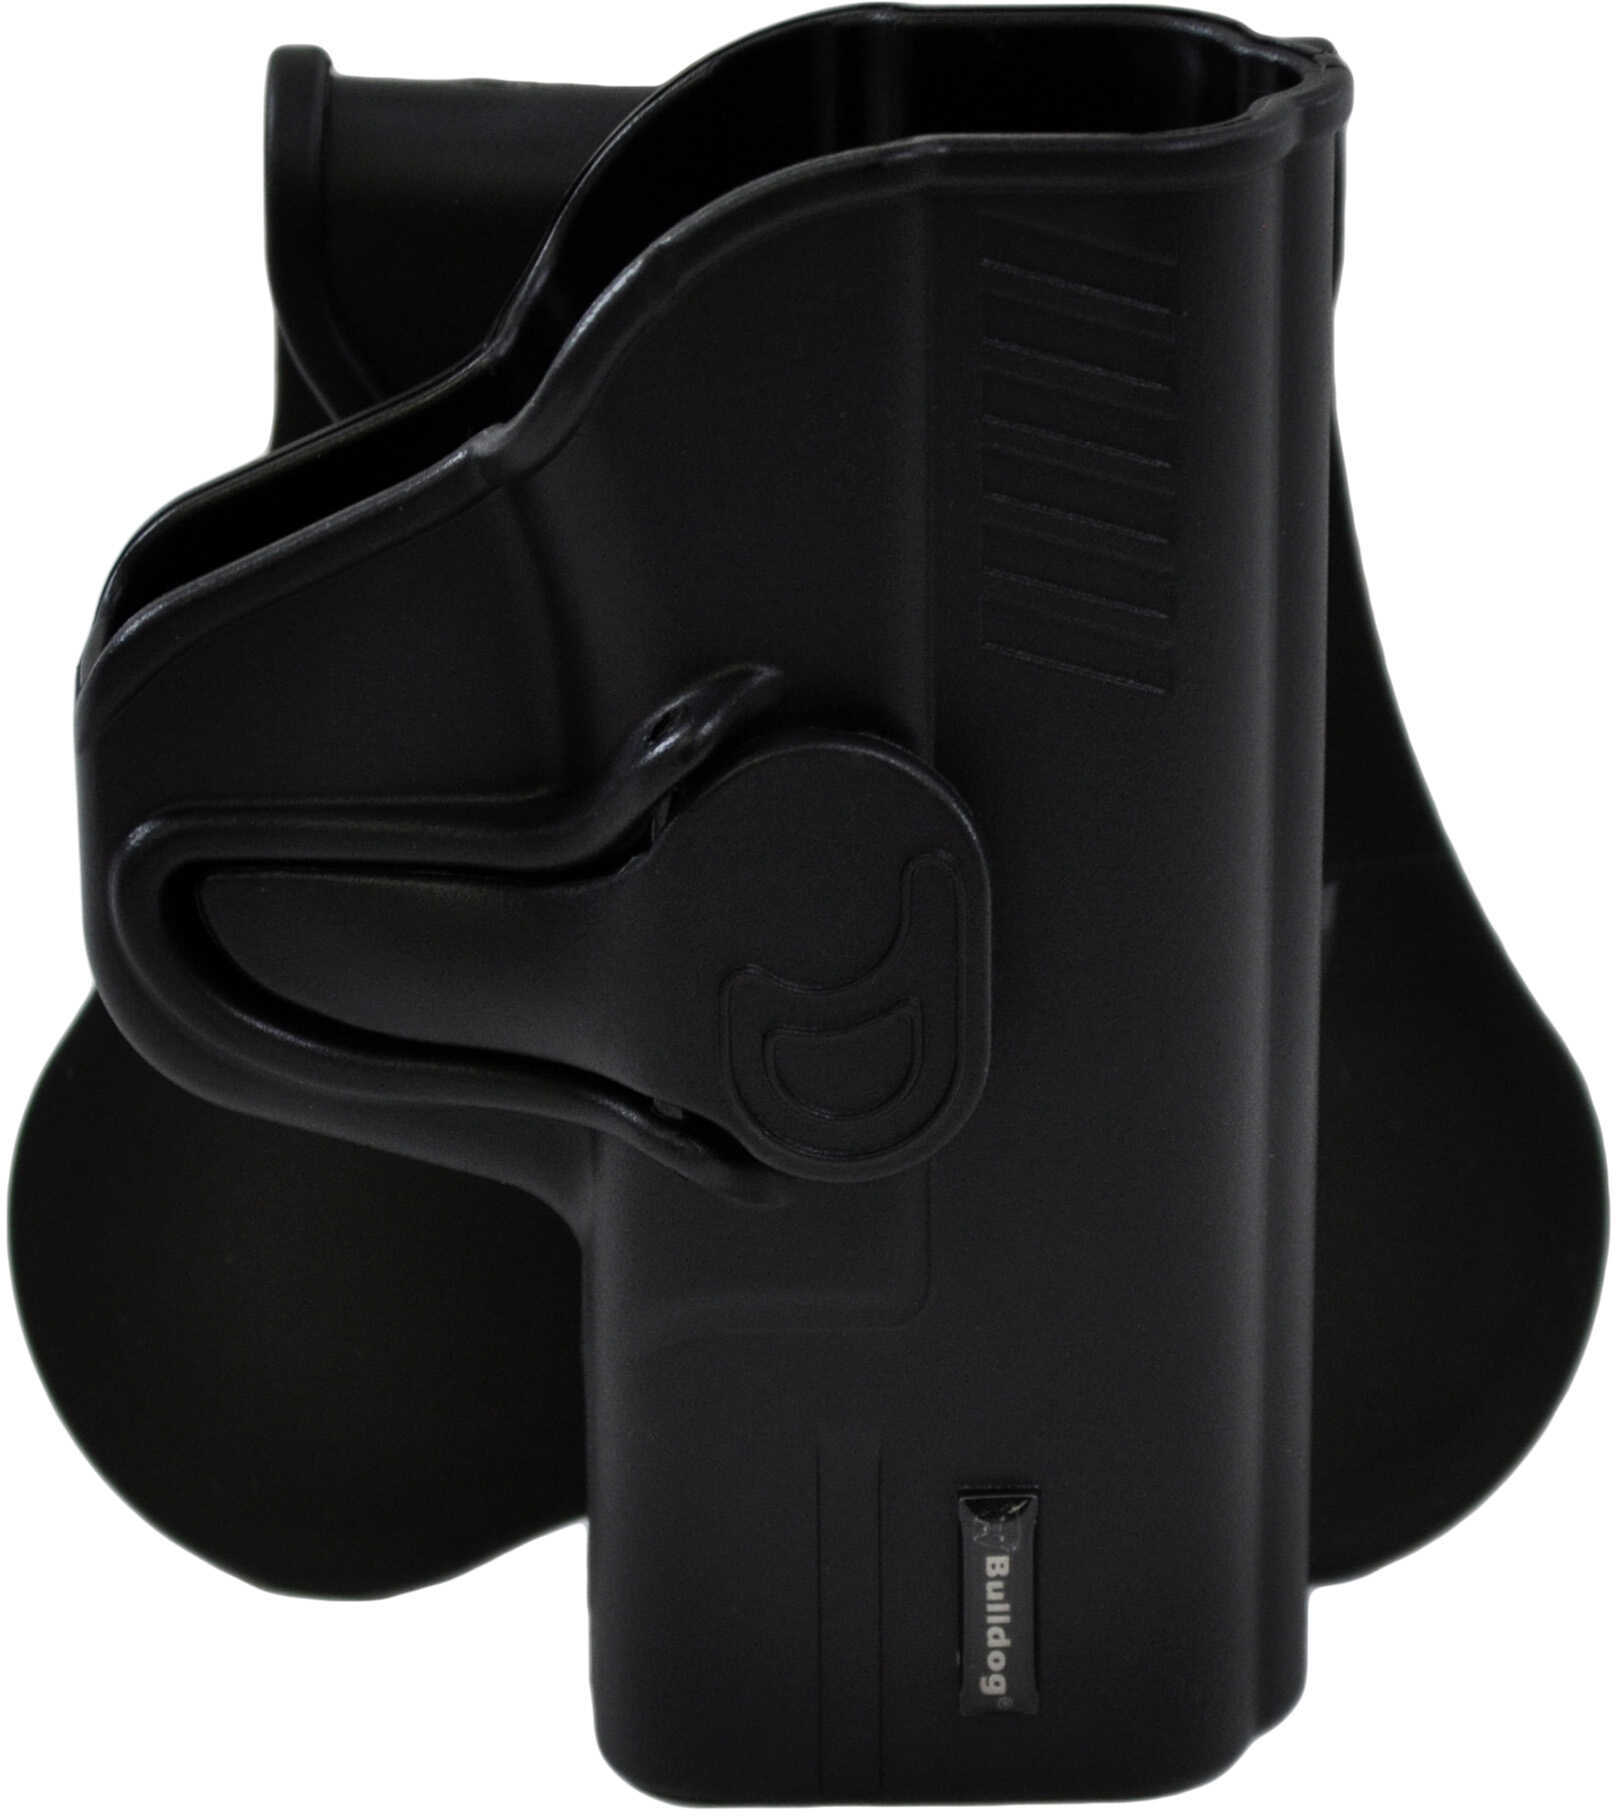 Bulldog Cases Rr Holster Paddle Poly S&W M&P Compact Black RH Md: RRSWMPC